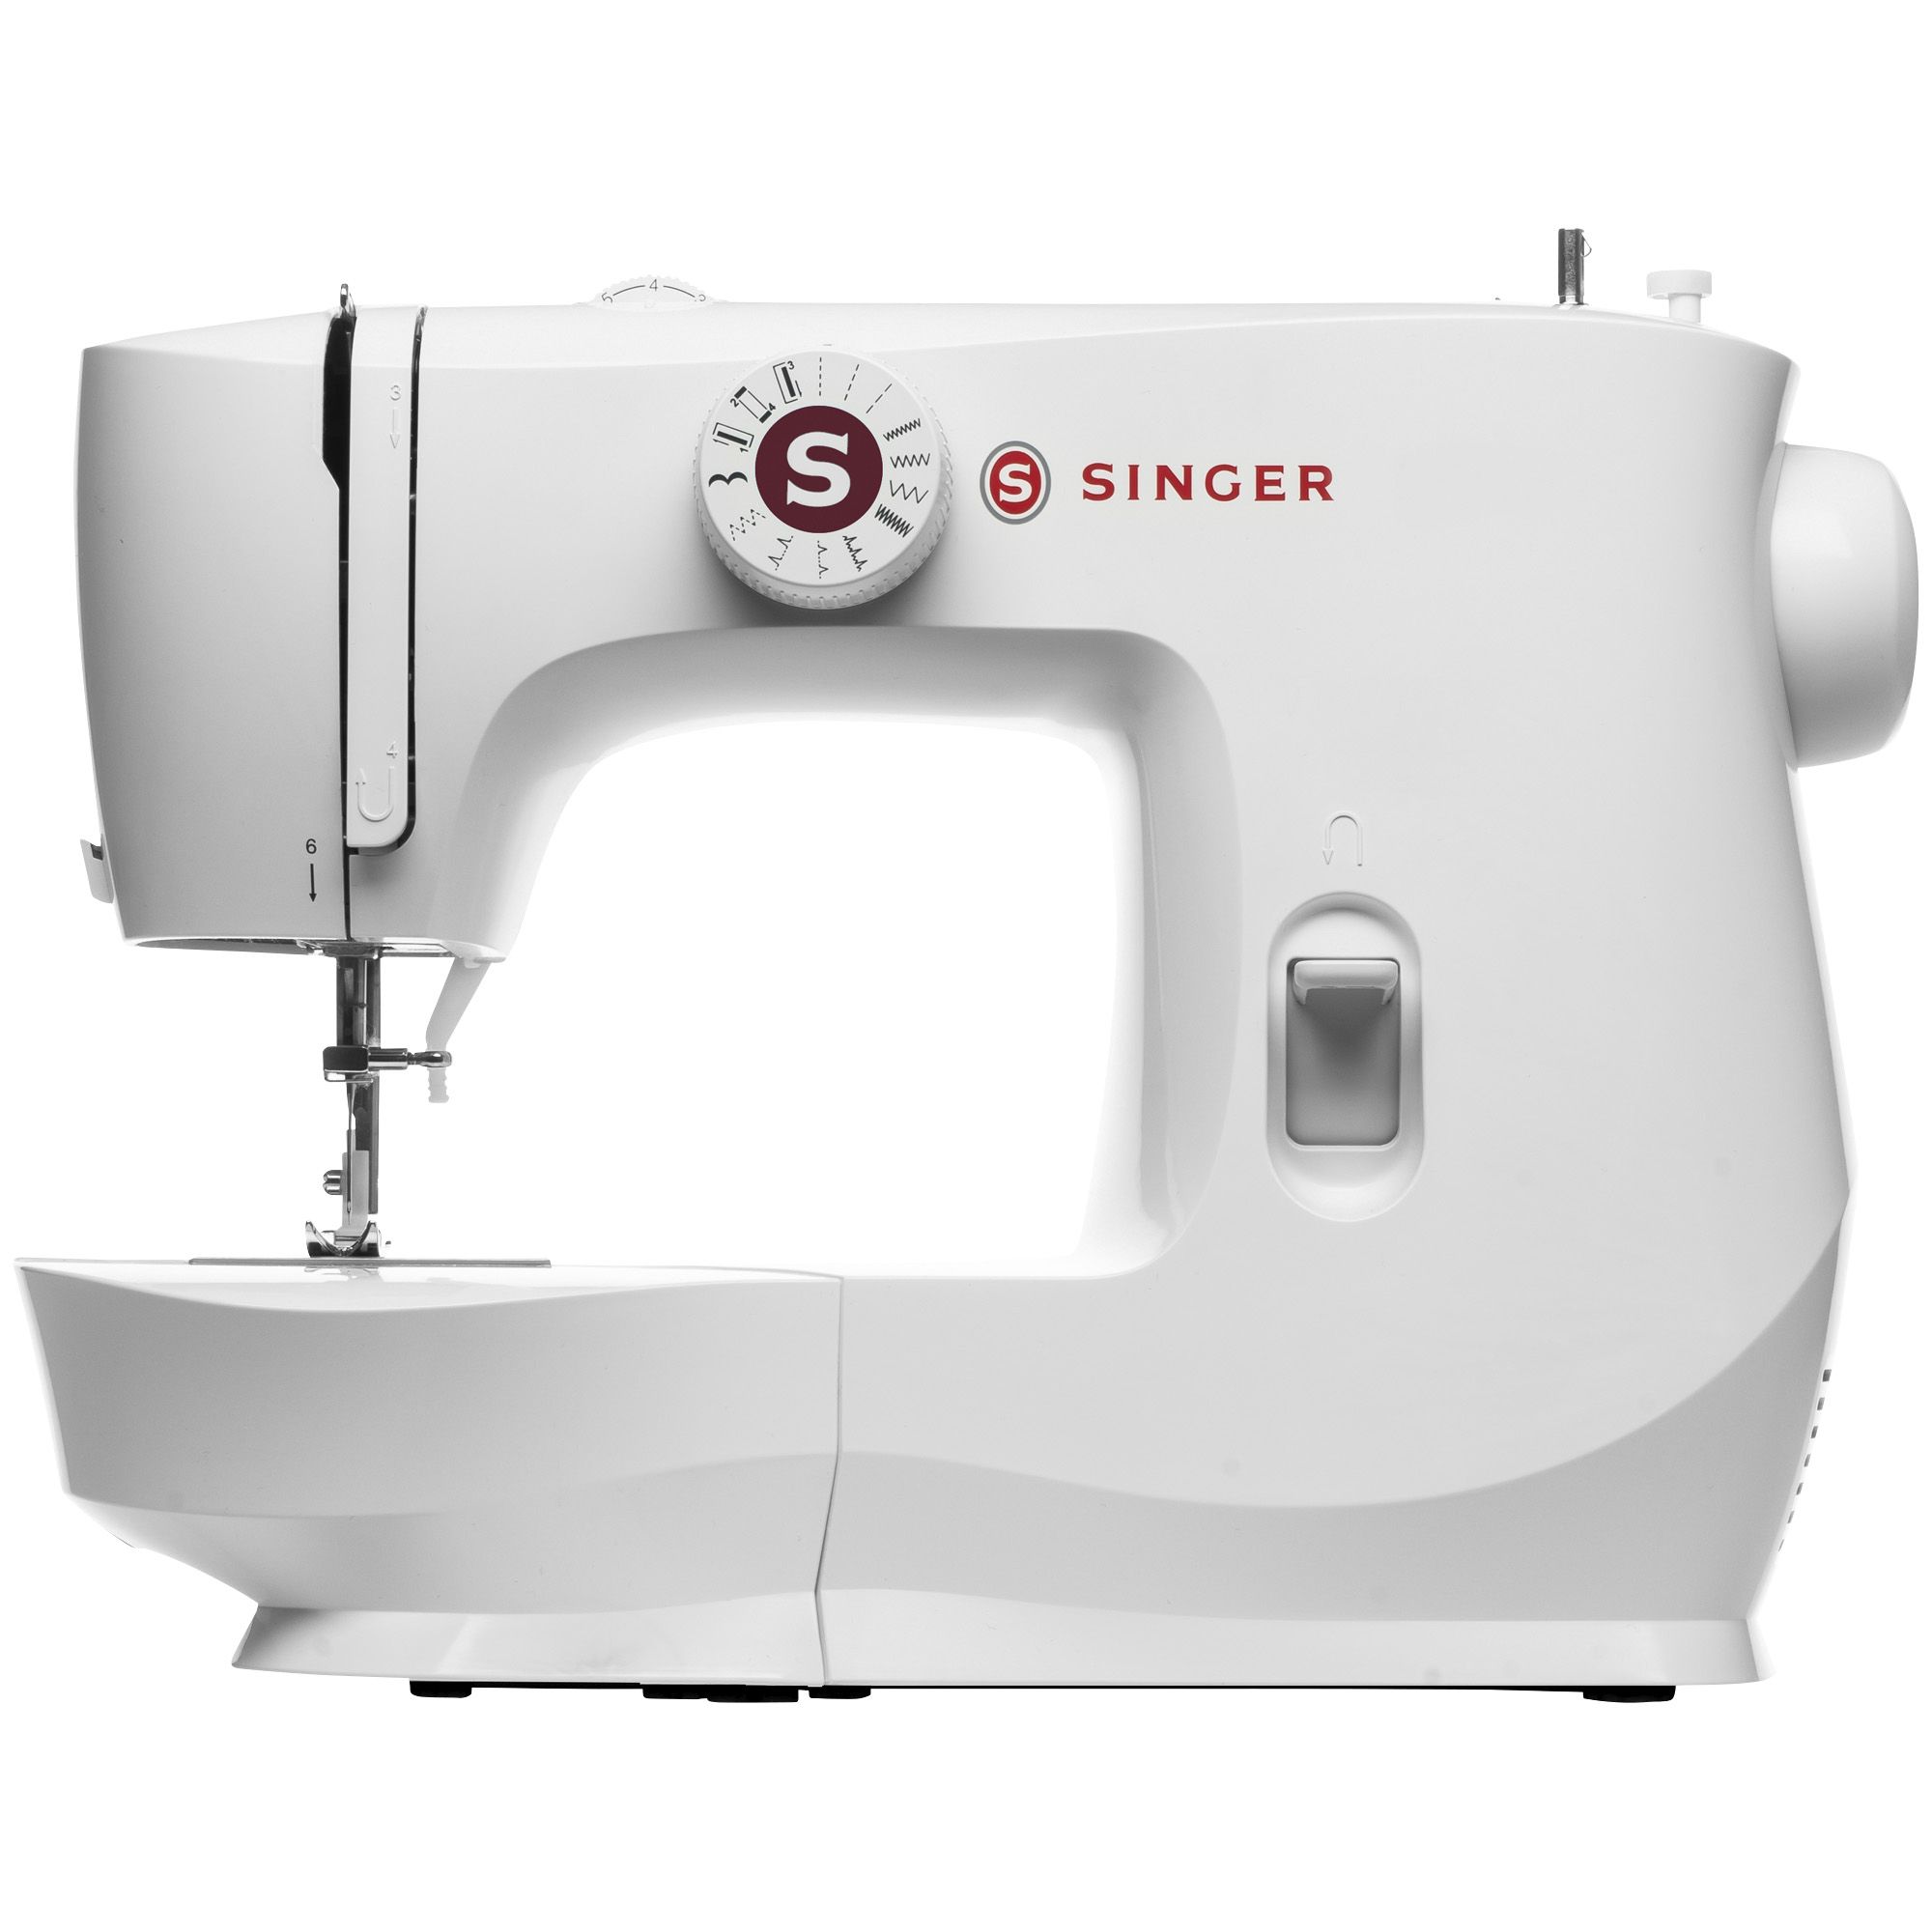 Singer Mx60 Portable Sewing Machine With 57 Stitch Applications